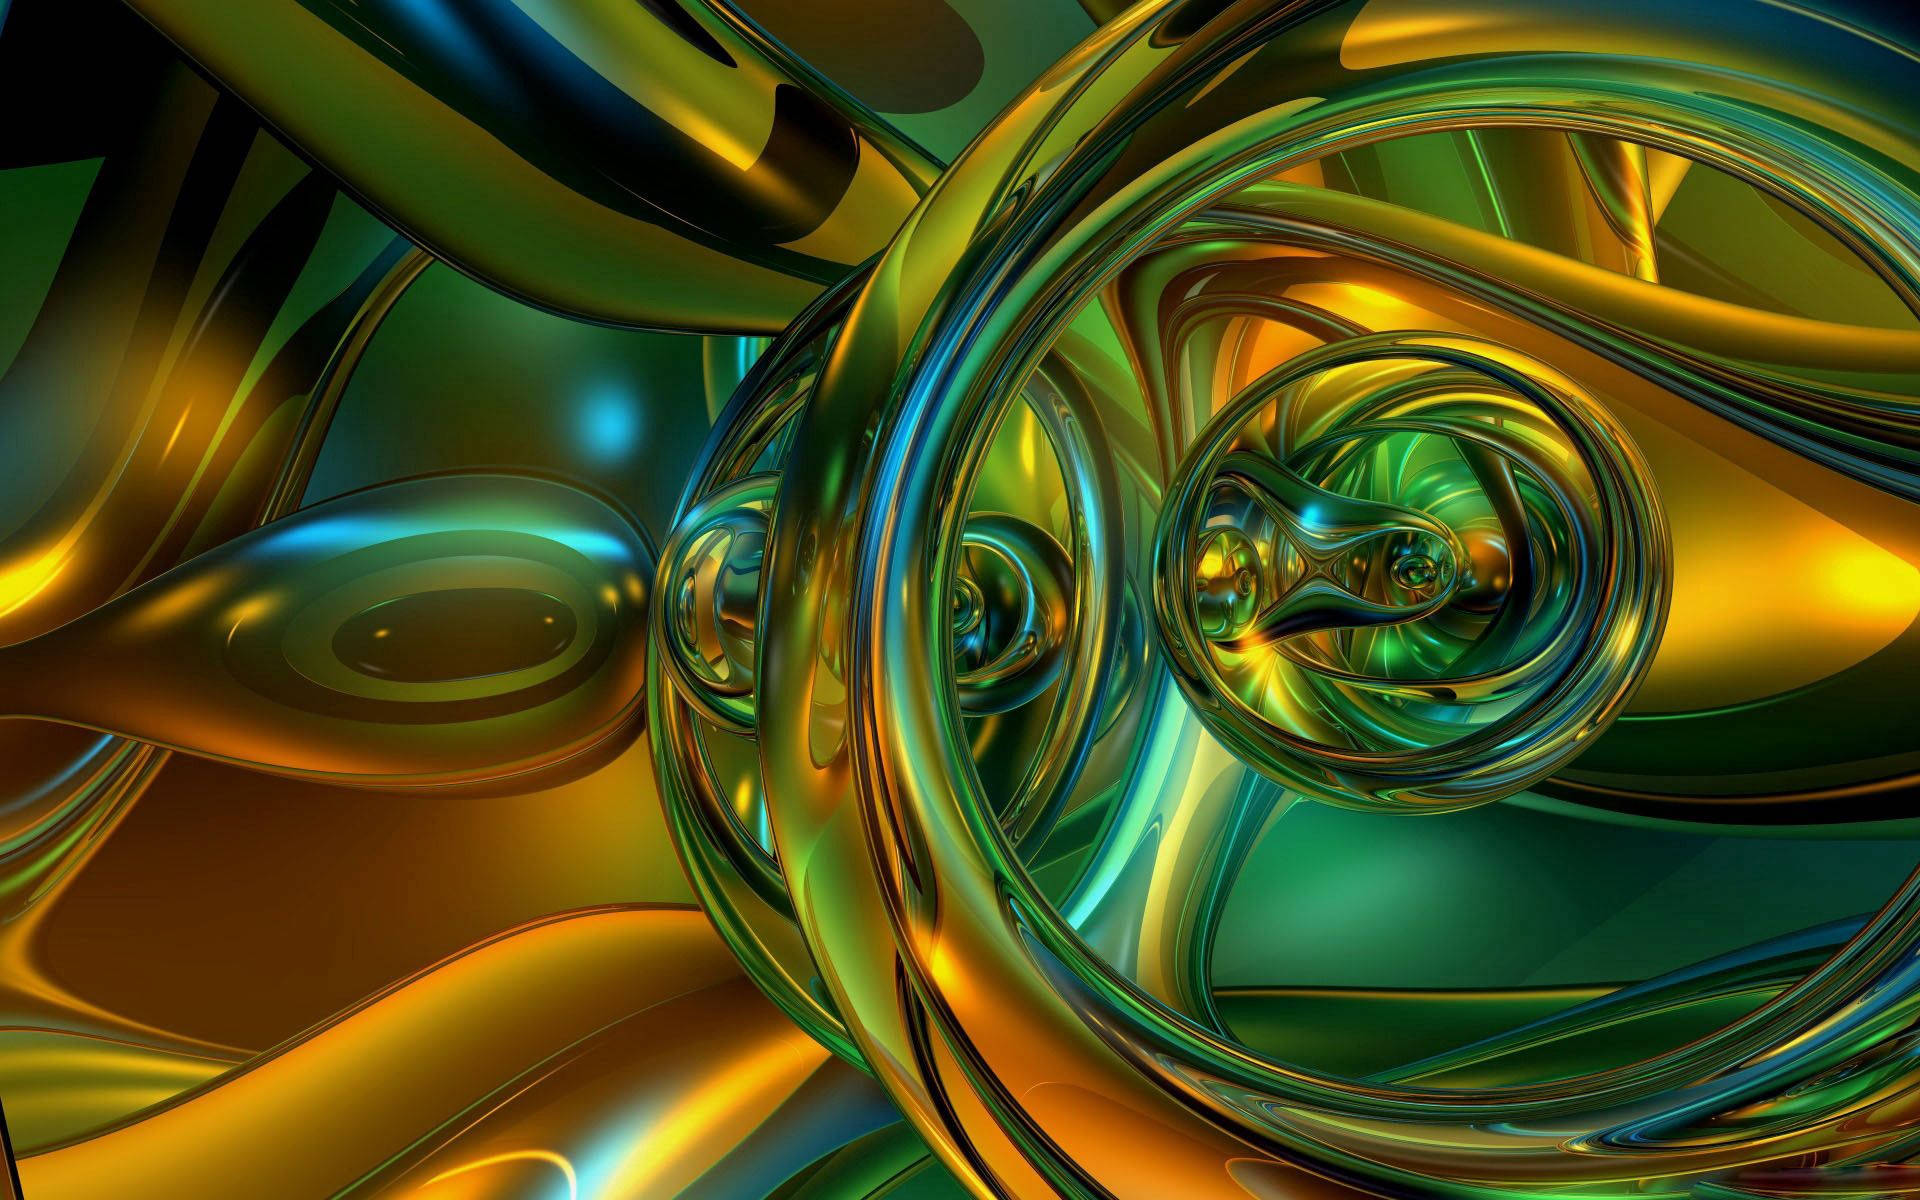 Shiny Gold and Green Abstraction Wallpaper